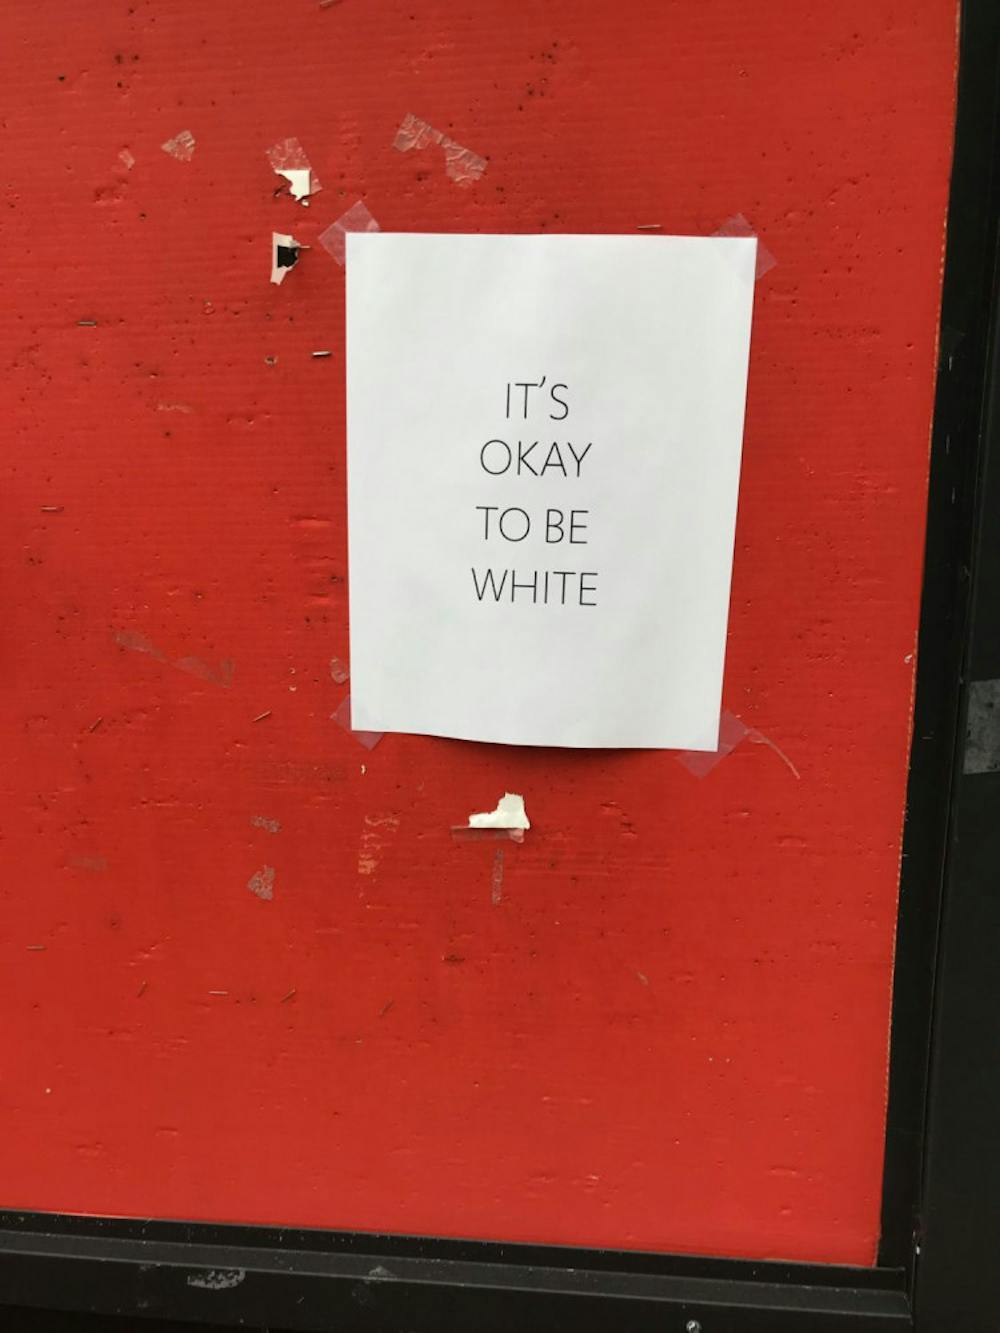 An anonymous flyer reading "IT'S OKAY TO BE WHITE" was found on a bulletin board in the Connell Student Center (CSC) on Mercer’s Macon campus November 8. 